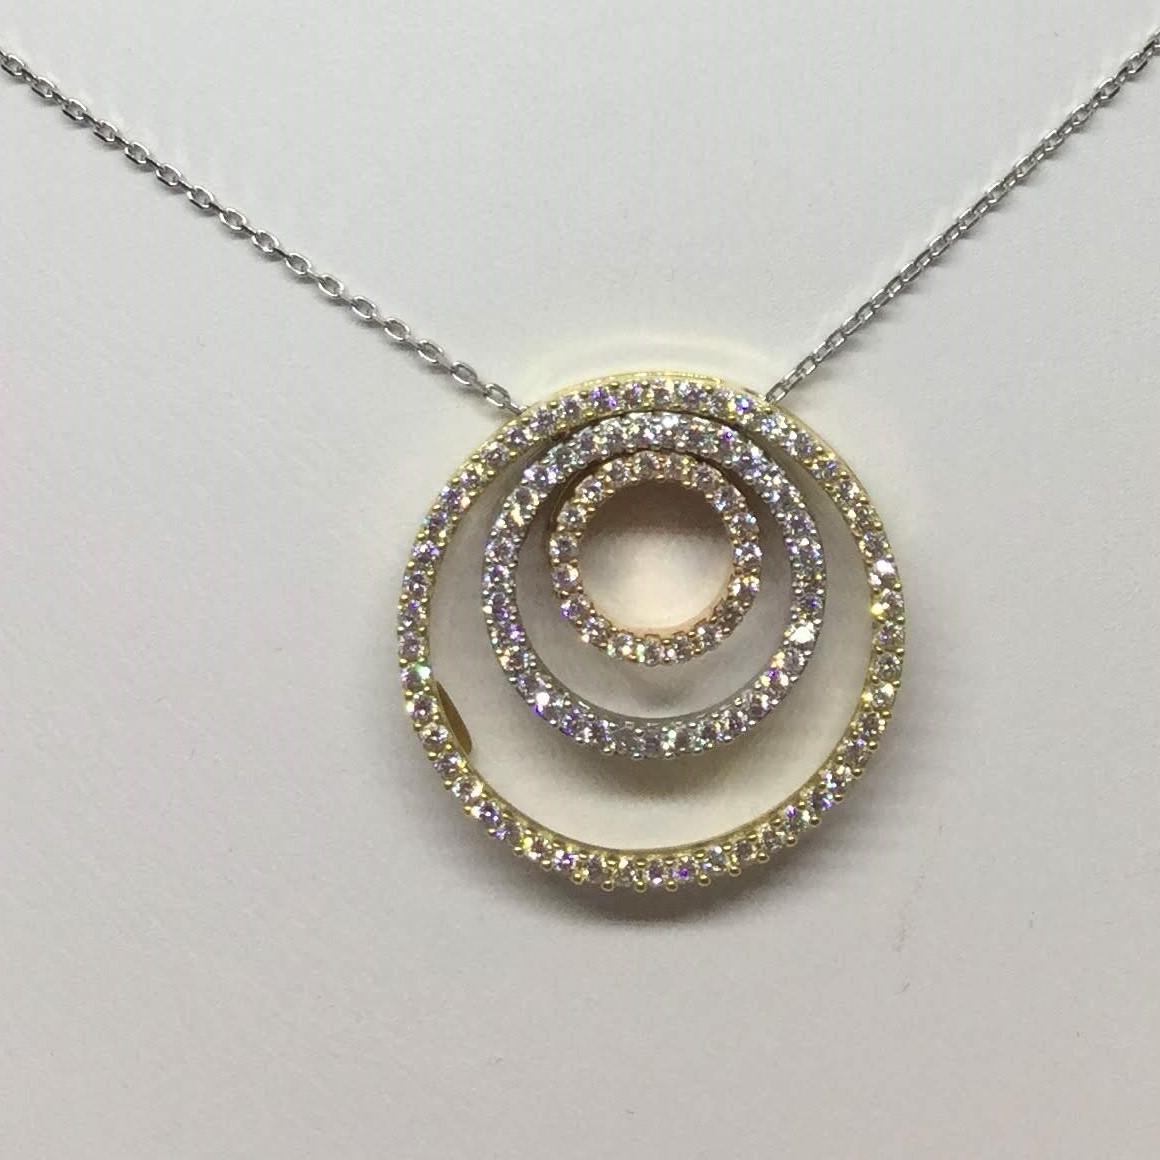 14K Tri-colored gold diamond necklace. The design is made up of 3 free moving rings of diamonds. The diamonds weigh approx 0.75 ctw. The necklace is 16 inches in length.